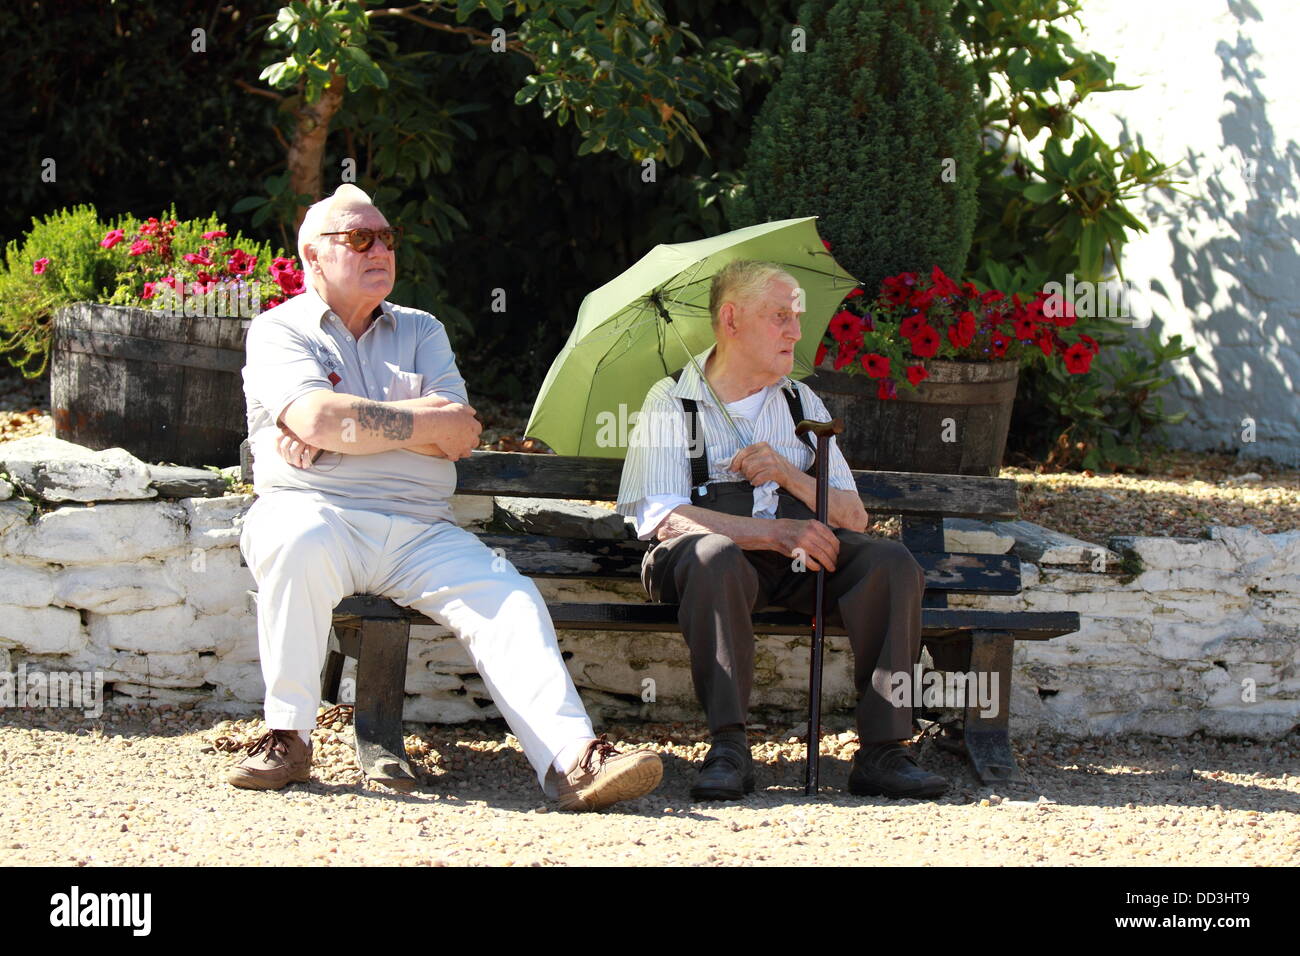 An old man uses an umbrella to shade from the sun while another man basks in the heat. Luss, Loch Lomond, Scotland, UK Stock Photo